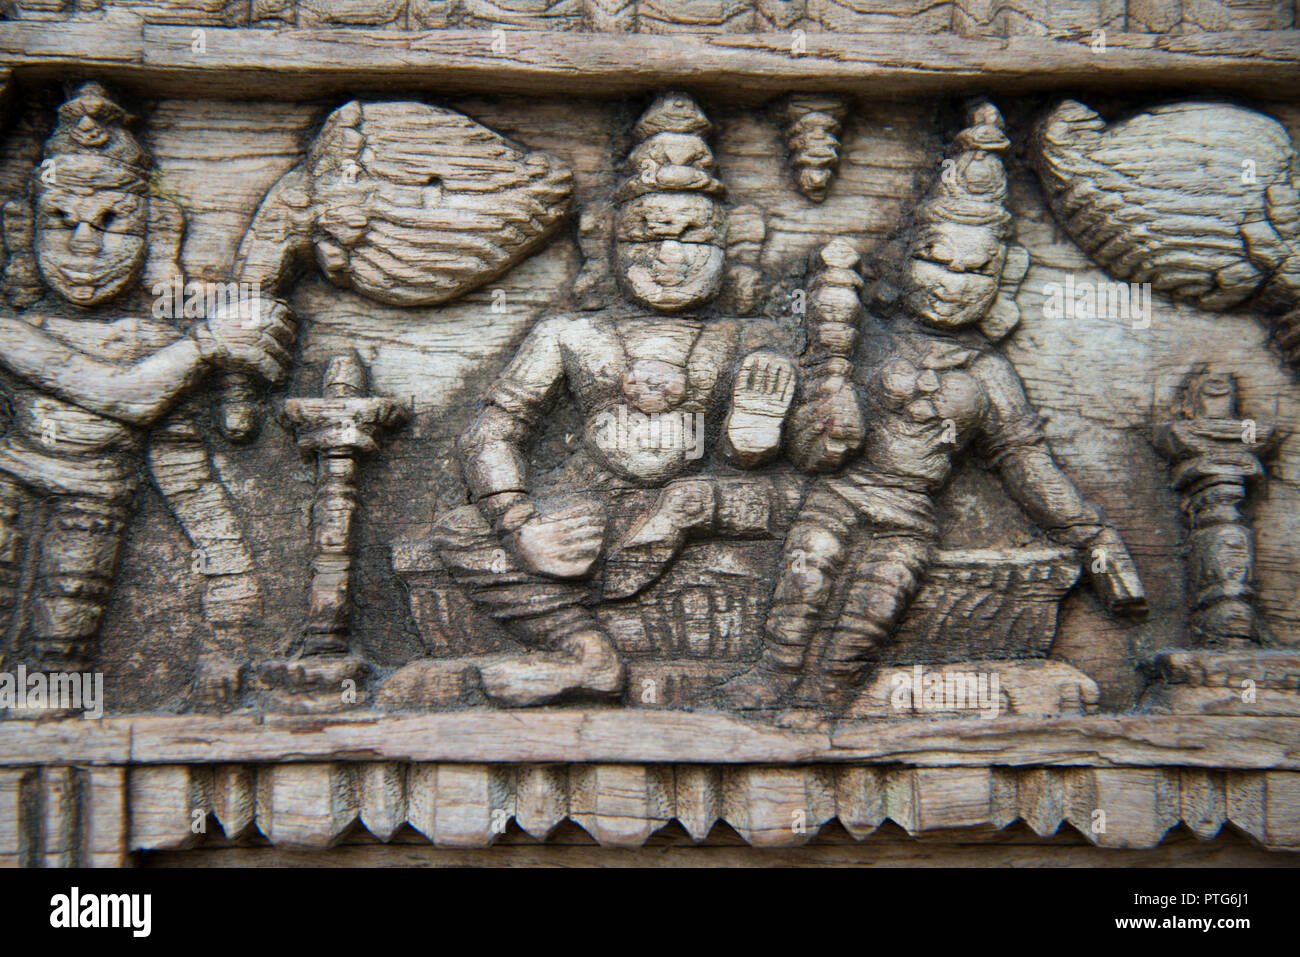 Antique Indian temple door carving detail Stock Photo